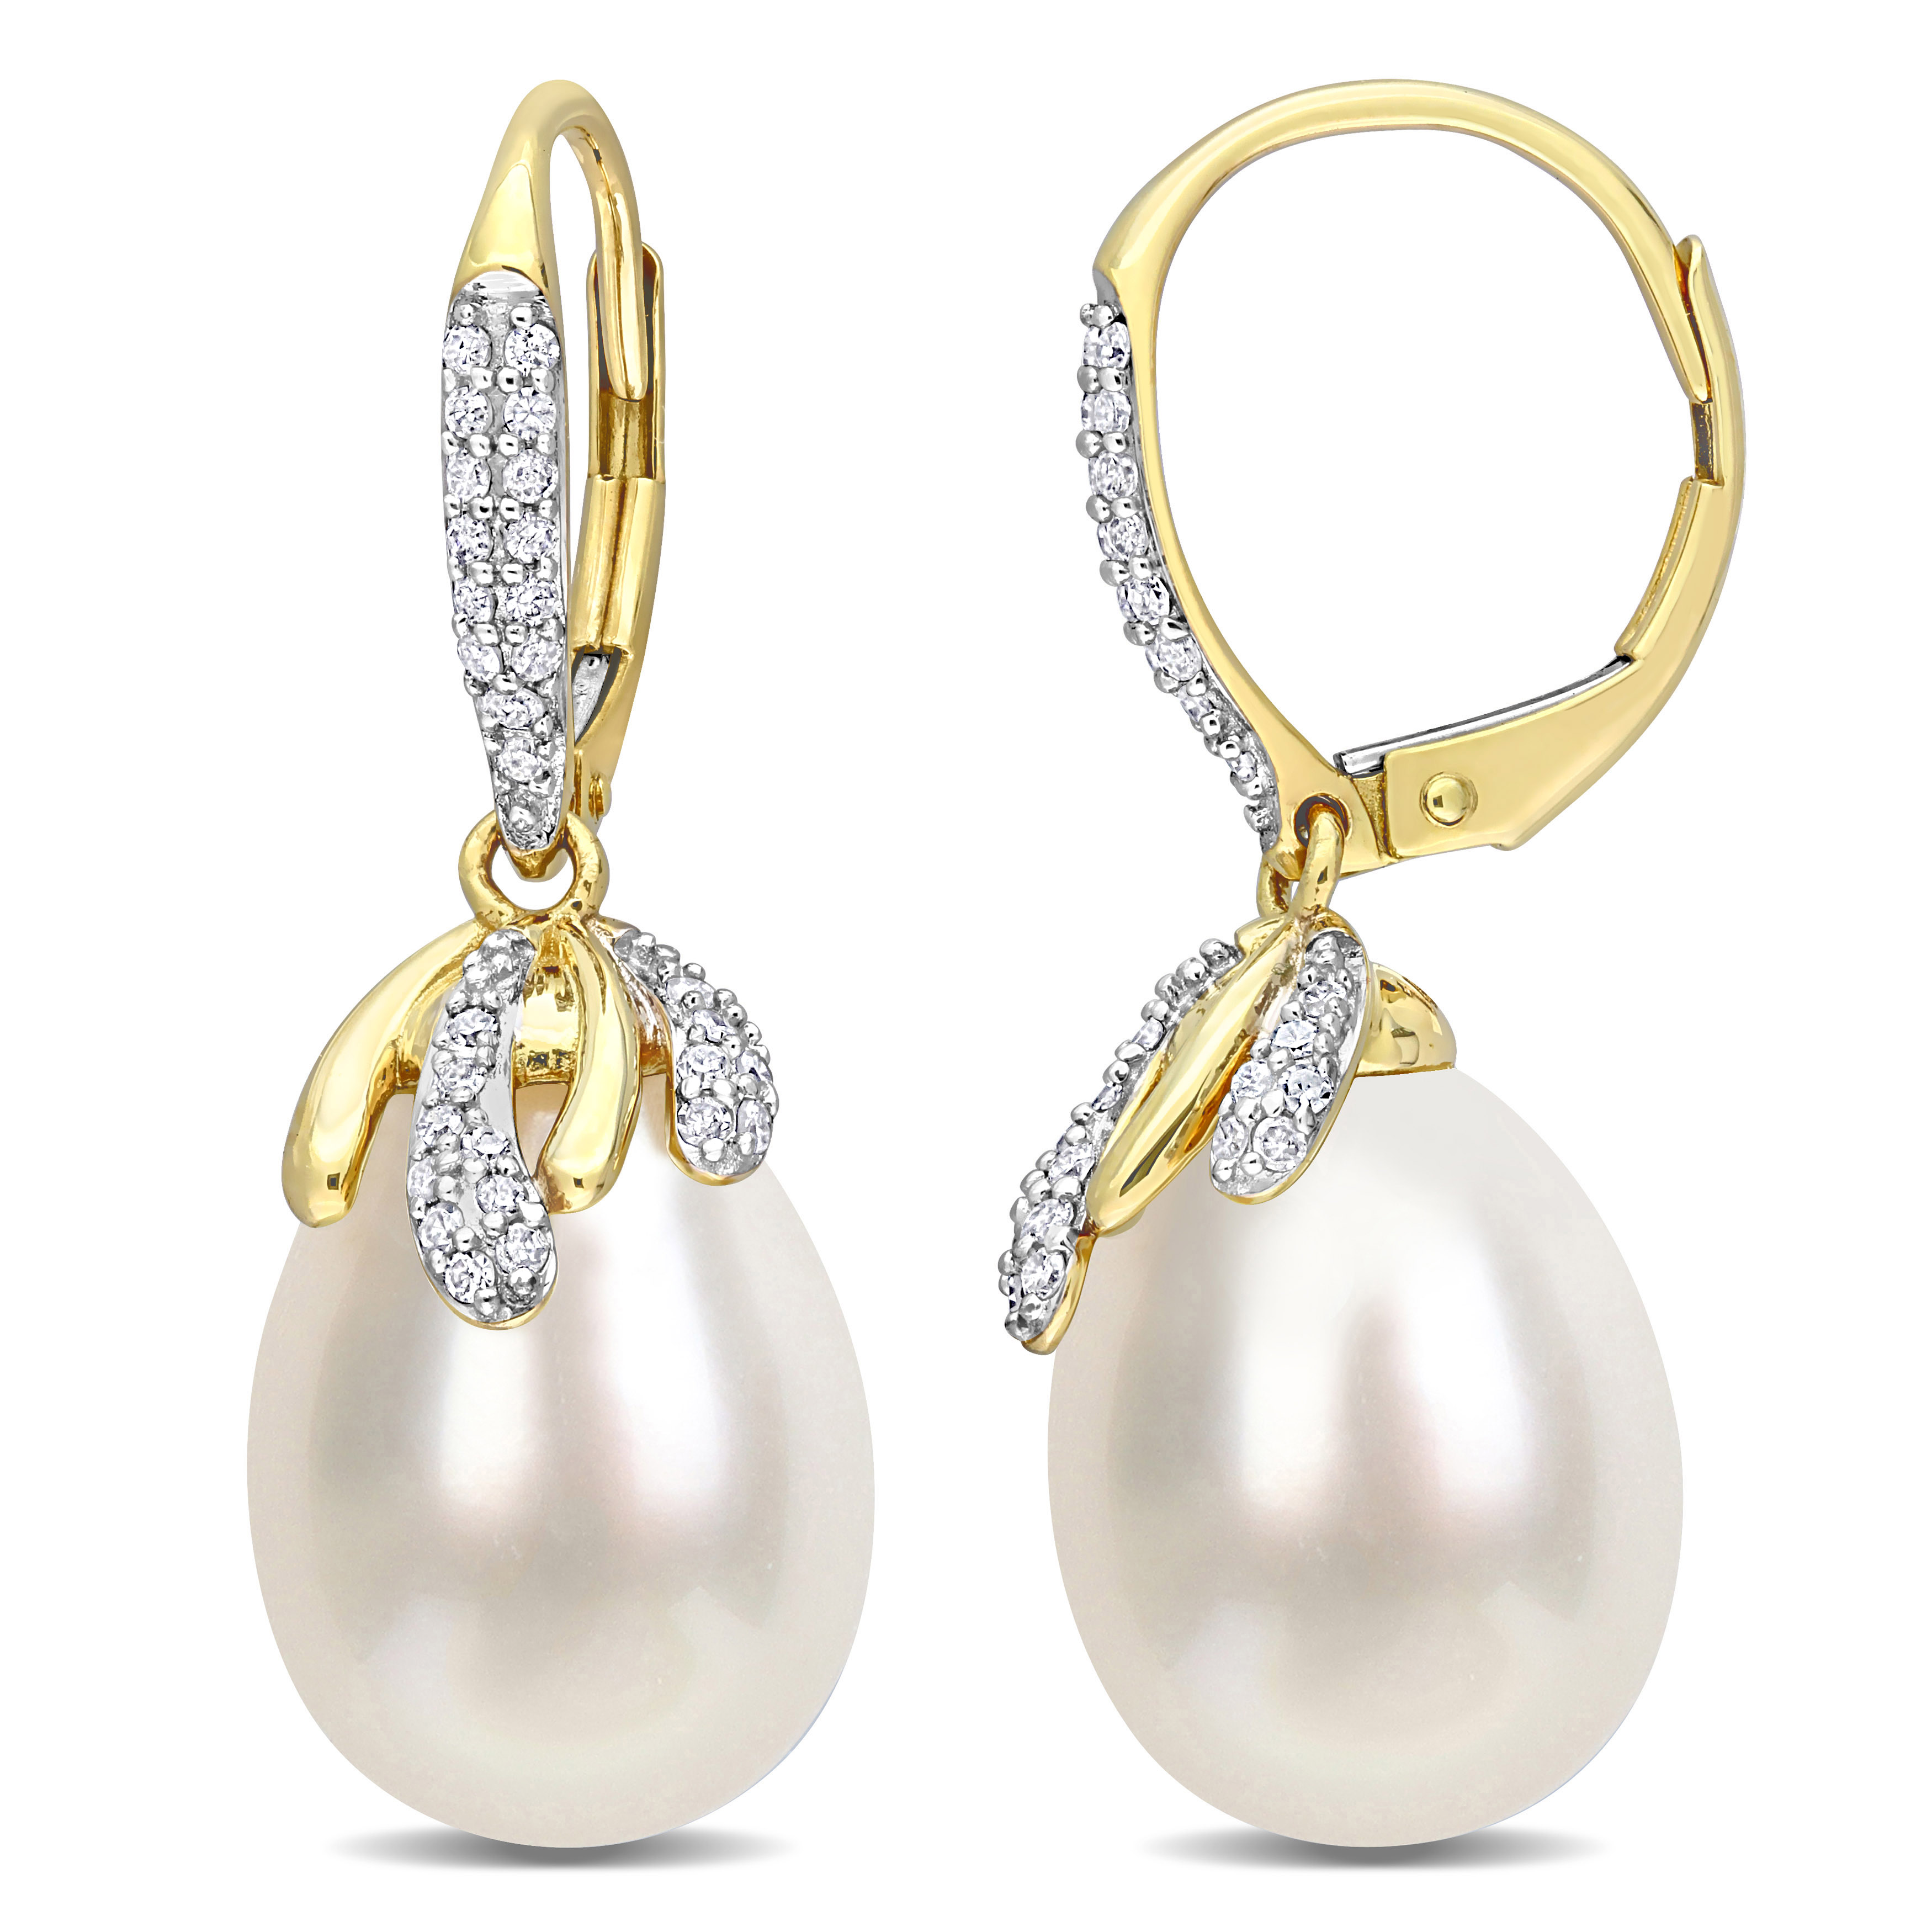 9-10 MM South Sea Cultured Pearl and 1/3 CT TW Diamond Leverback Earrings in 14k Yellow Gold